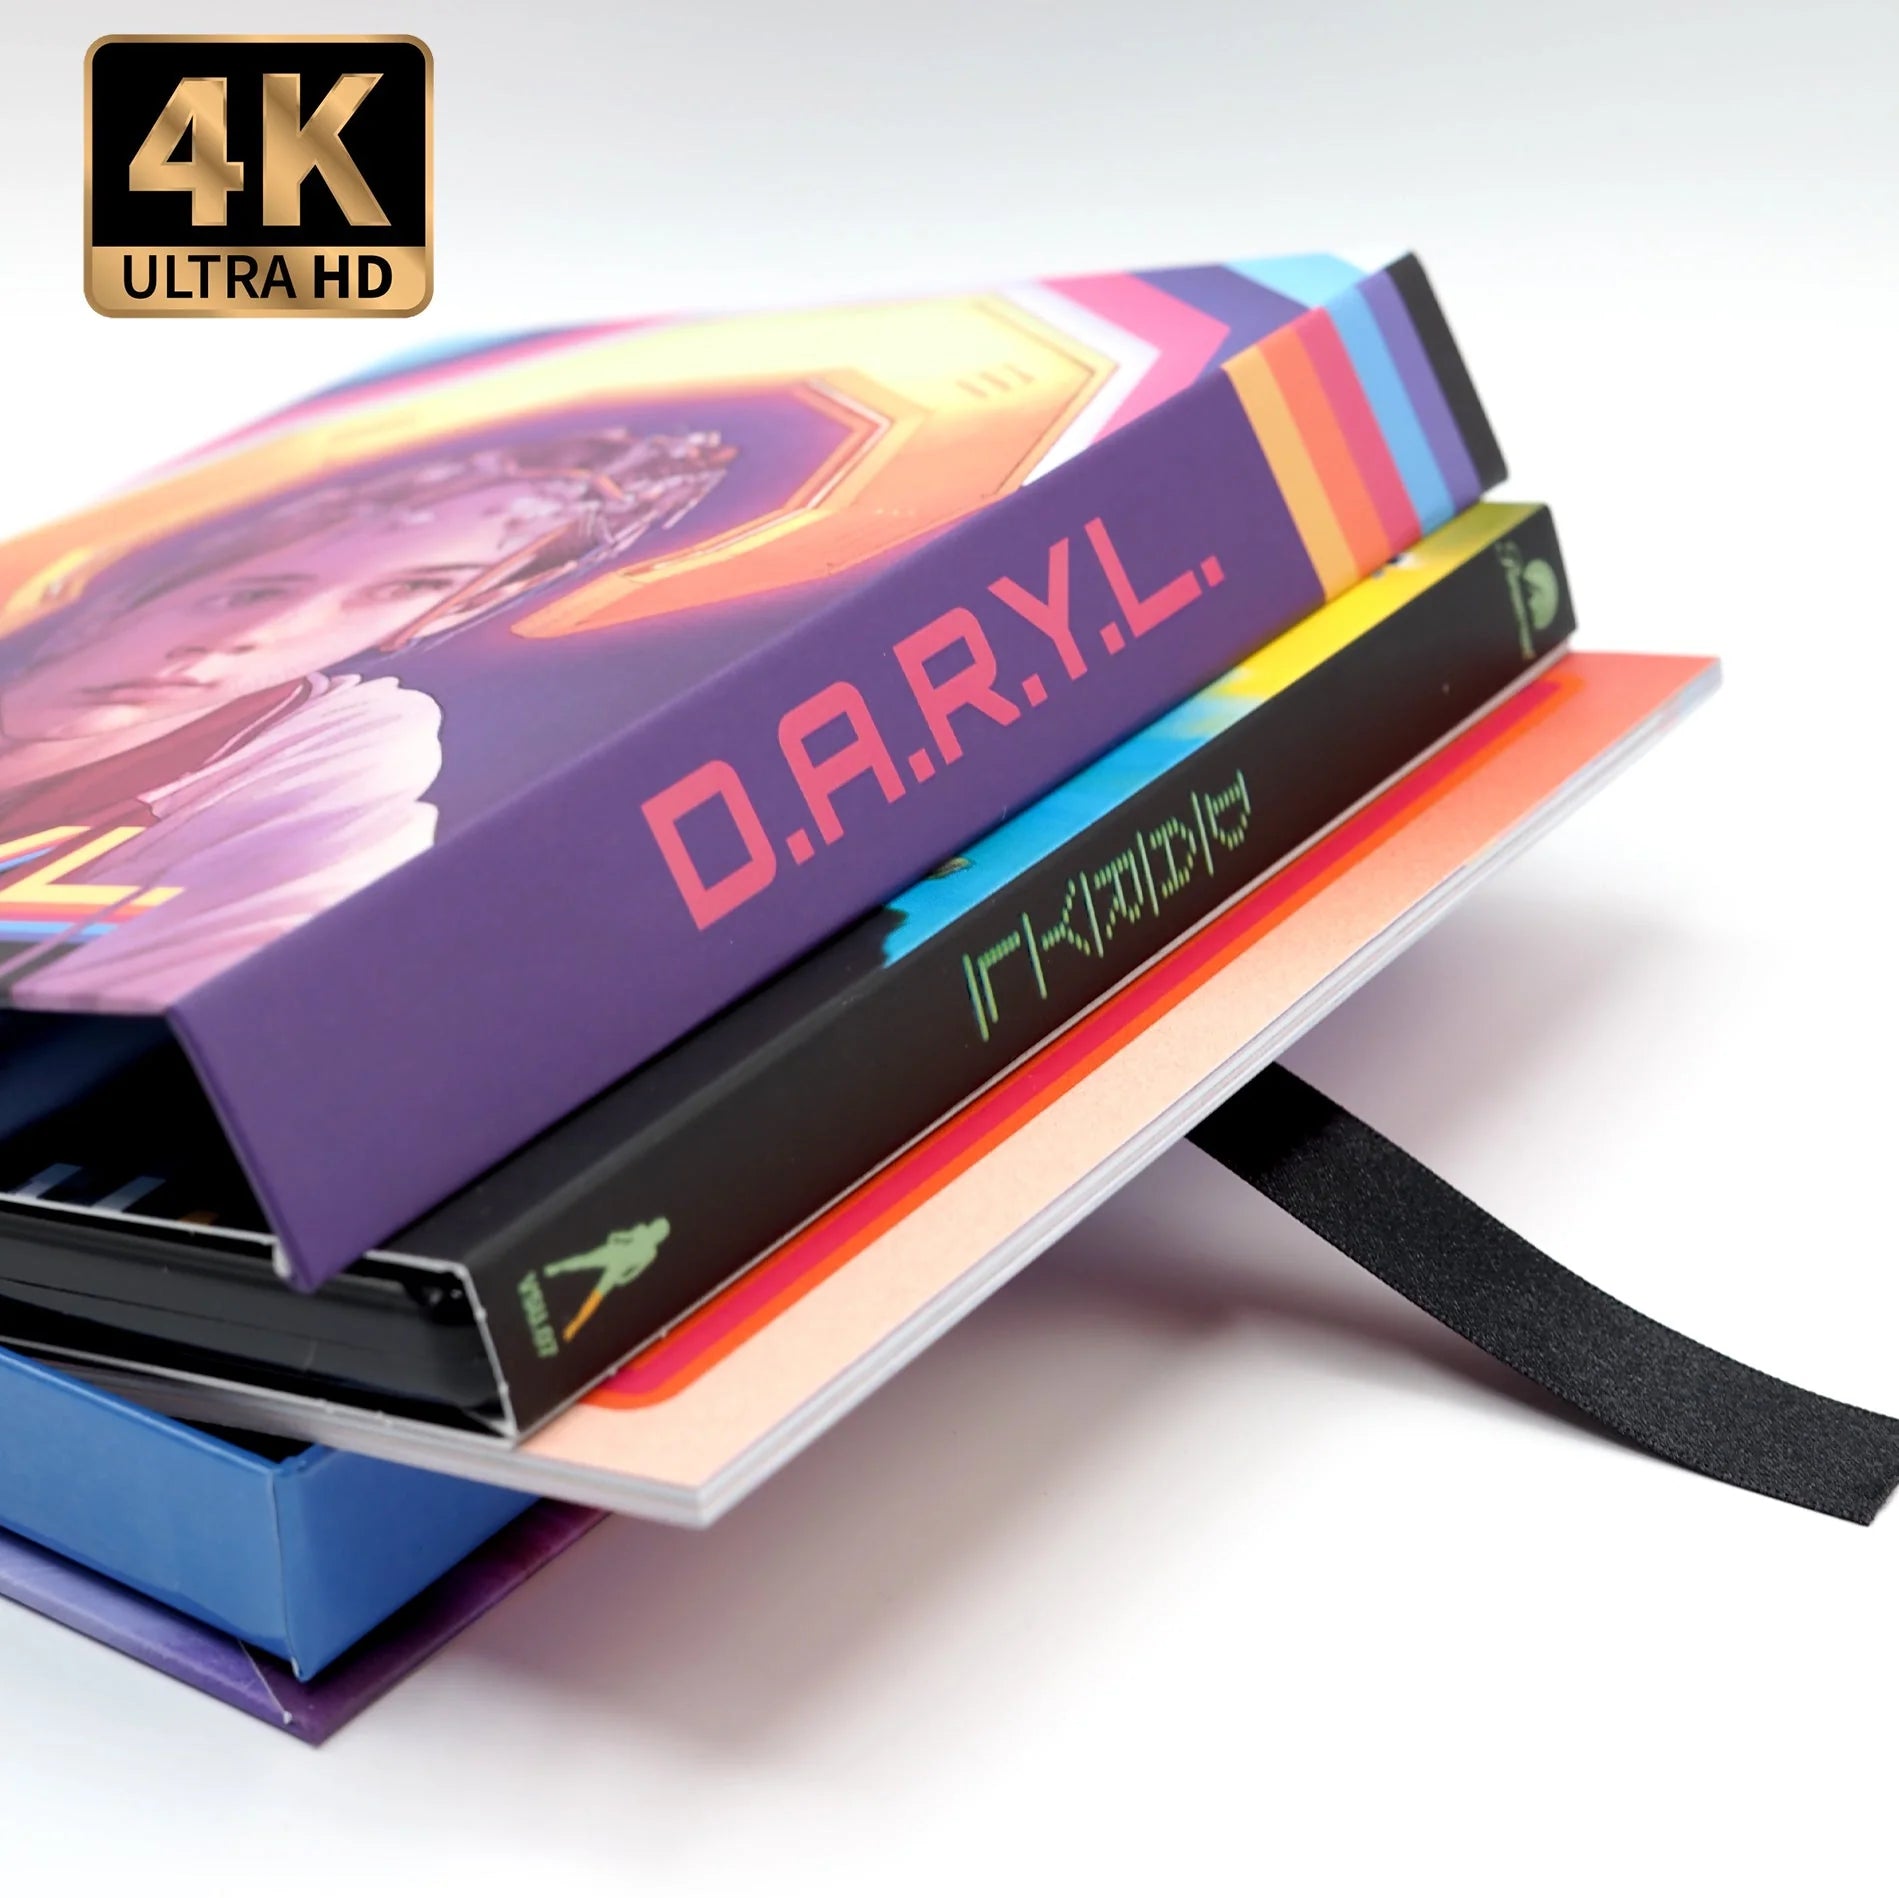 D.A.R.Y.L. (Limited Edition Deluxe Box 4K UHD/BLU-RAY Combo 